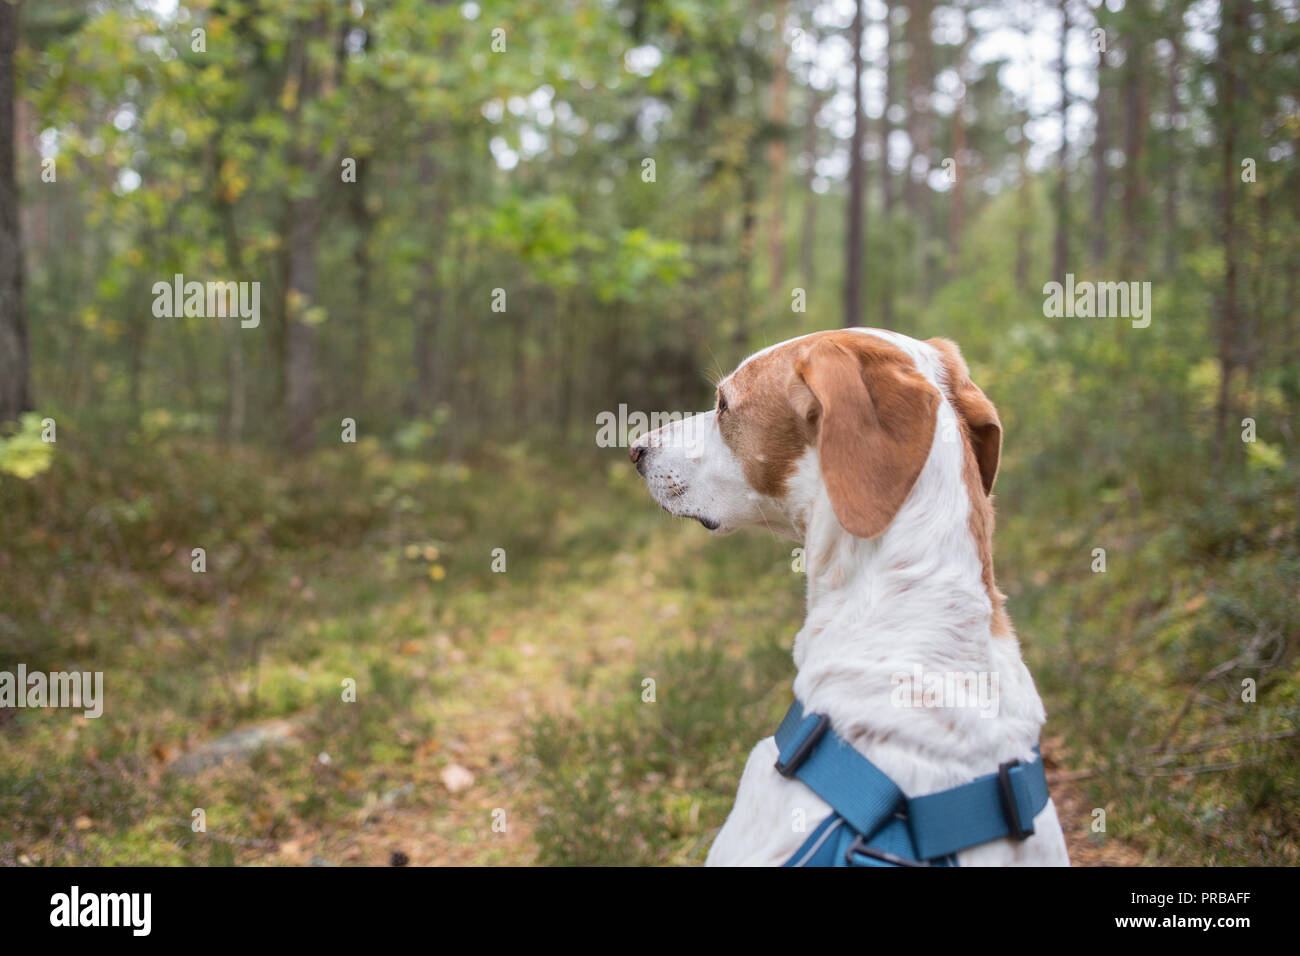 A portrait of the back of a dog looking out in a Scandinavian forest. Stock Photo